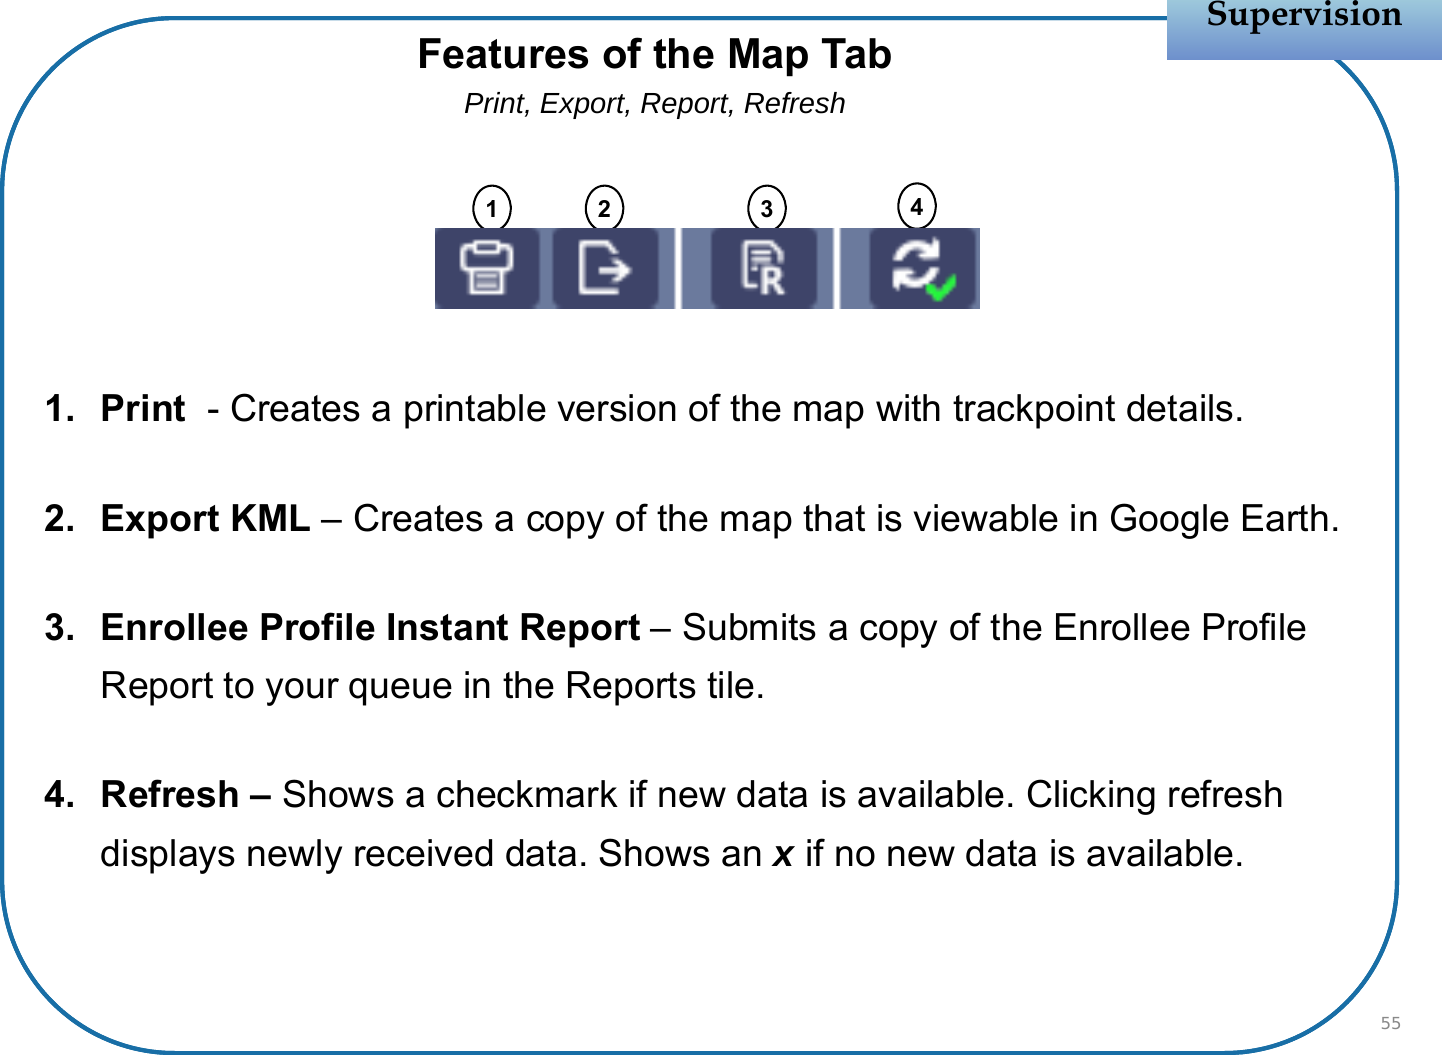 1. Print  - Creates a printable version of the map with trackpoint details.2. Export KML – Creates a copy of the map that is viewable in Google Earth.3. Enrollee Profile Instant Report – Submits a copy of the Enrollee Profile Report to your queue in the Reports tile.4. Refresh – Shows a checkmark if new data is available. Clicking refresh displays newly received data. Shows an xif no new data is available.SupervisionSupervision55Features of the Map TabPrint, Export, Report, Refresh1 2 3 4